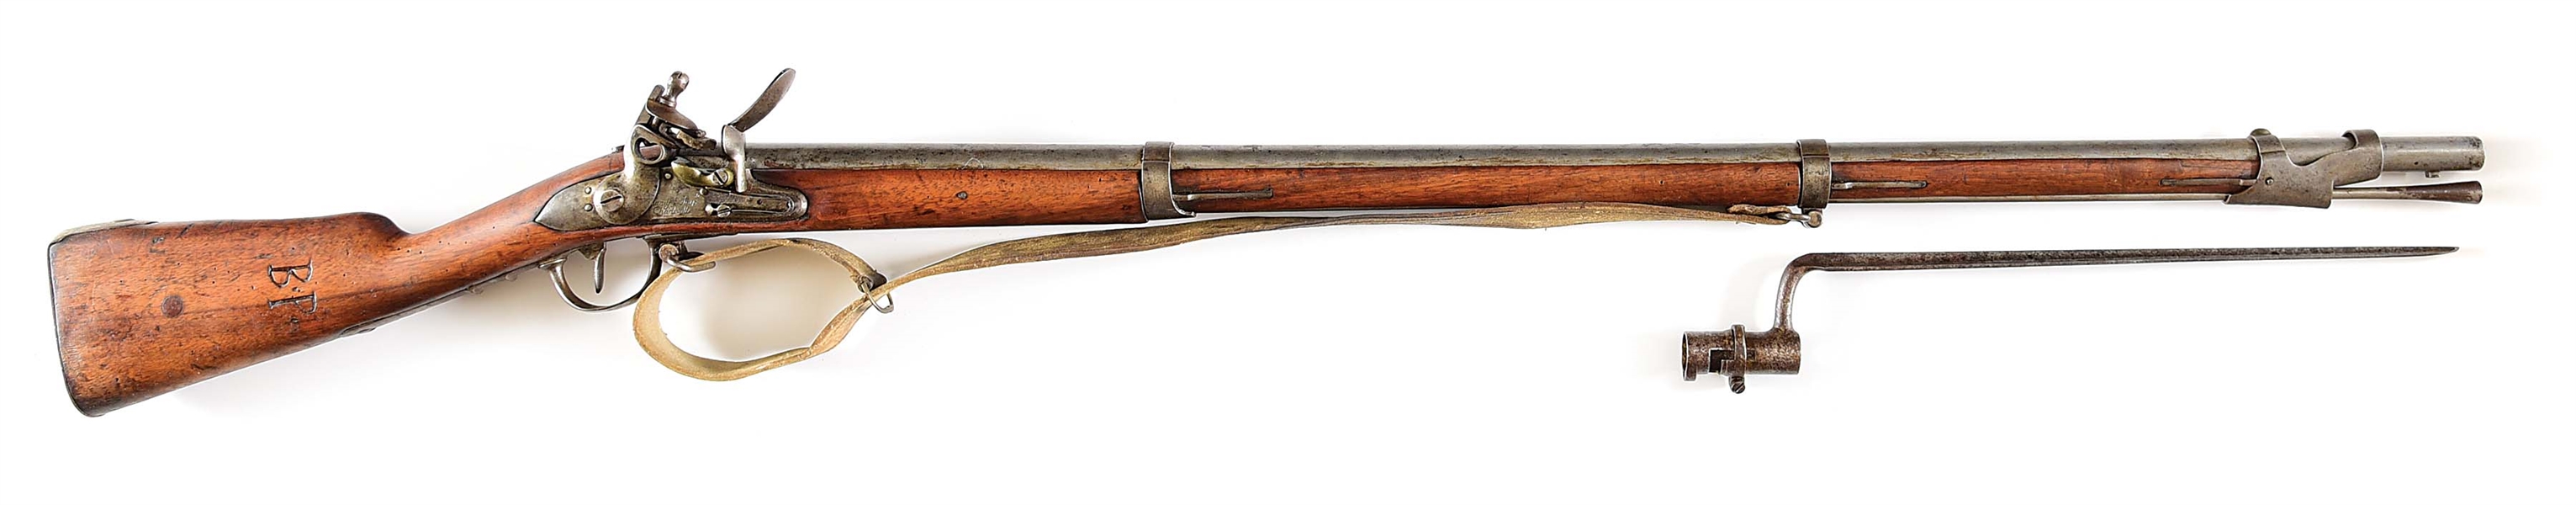 (A) FRENCH MODEL 1777 CORRIGE AN IX MUSKET, CHARLEVILLE MANUFACTURE, WITH SLING AND BAYONET, DESIRABLE PRE-WATERLOO DATE.